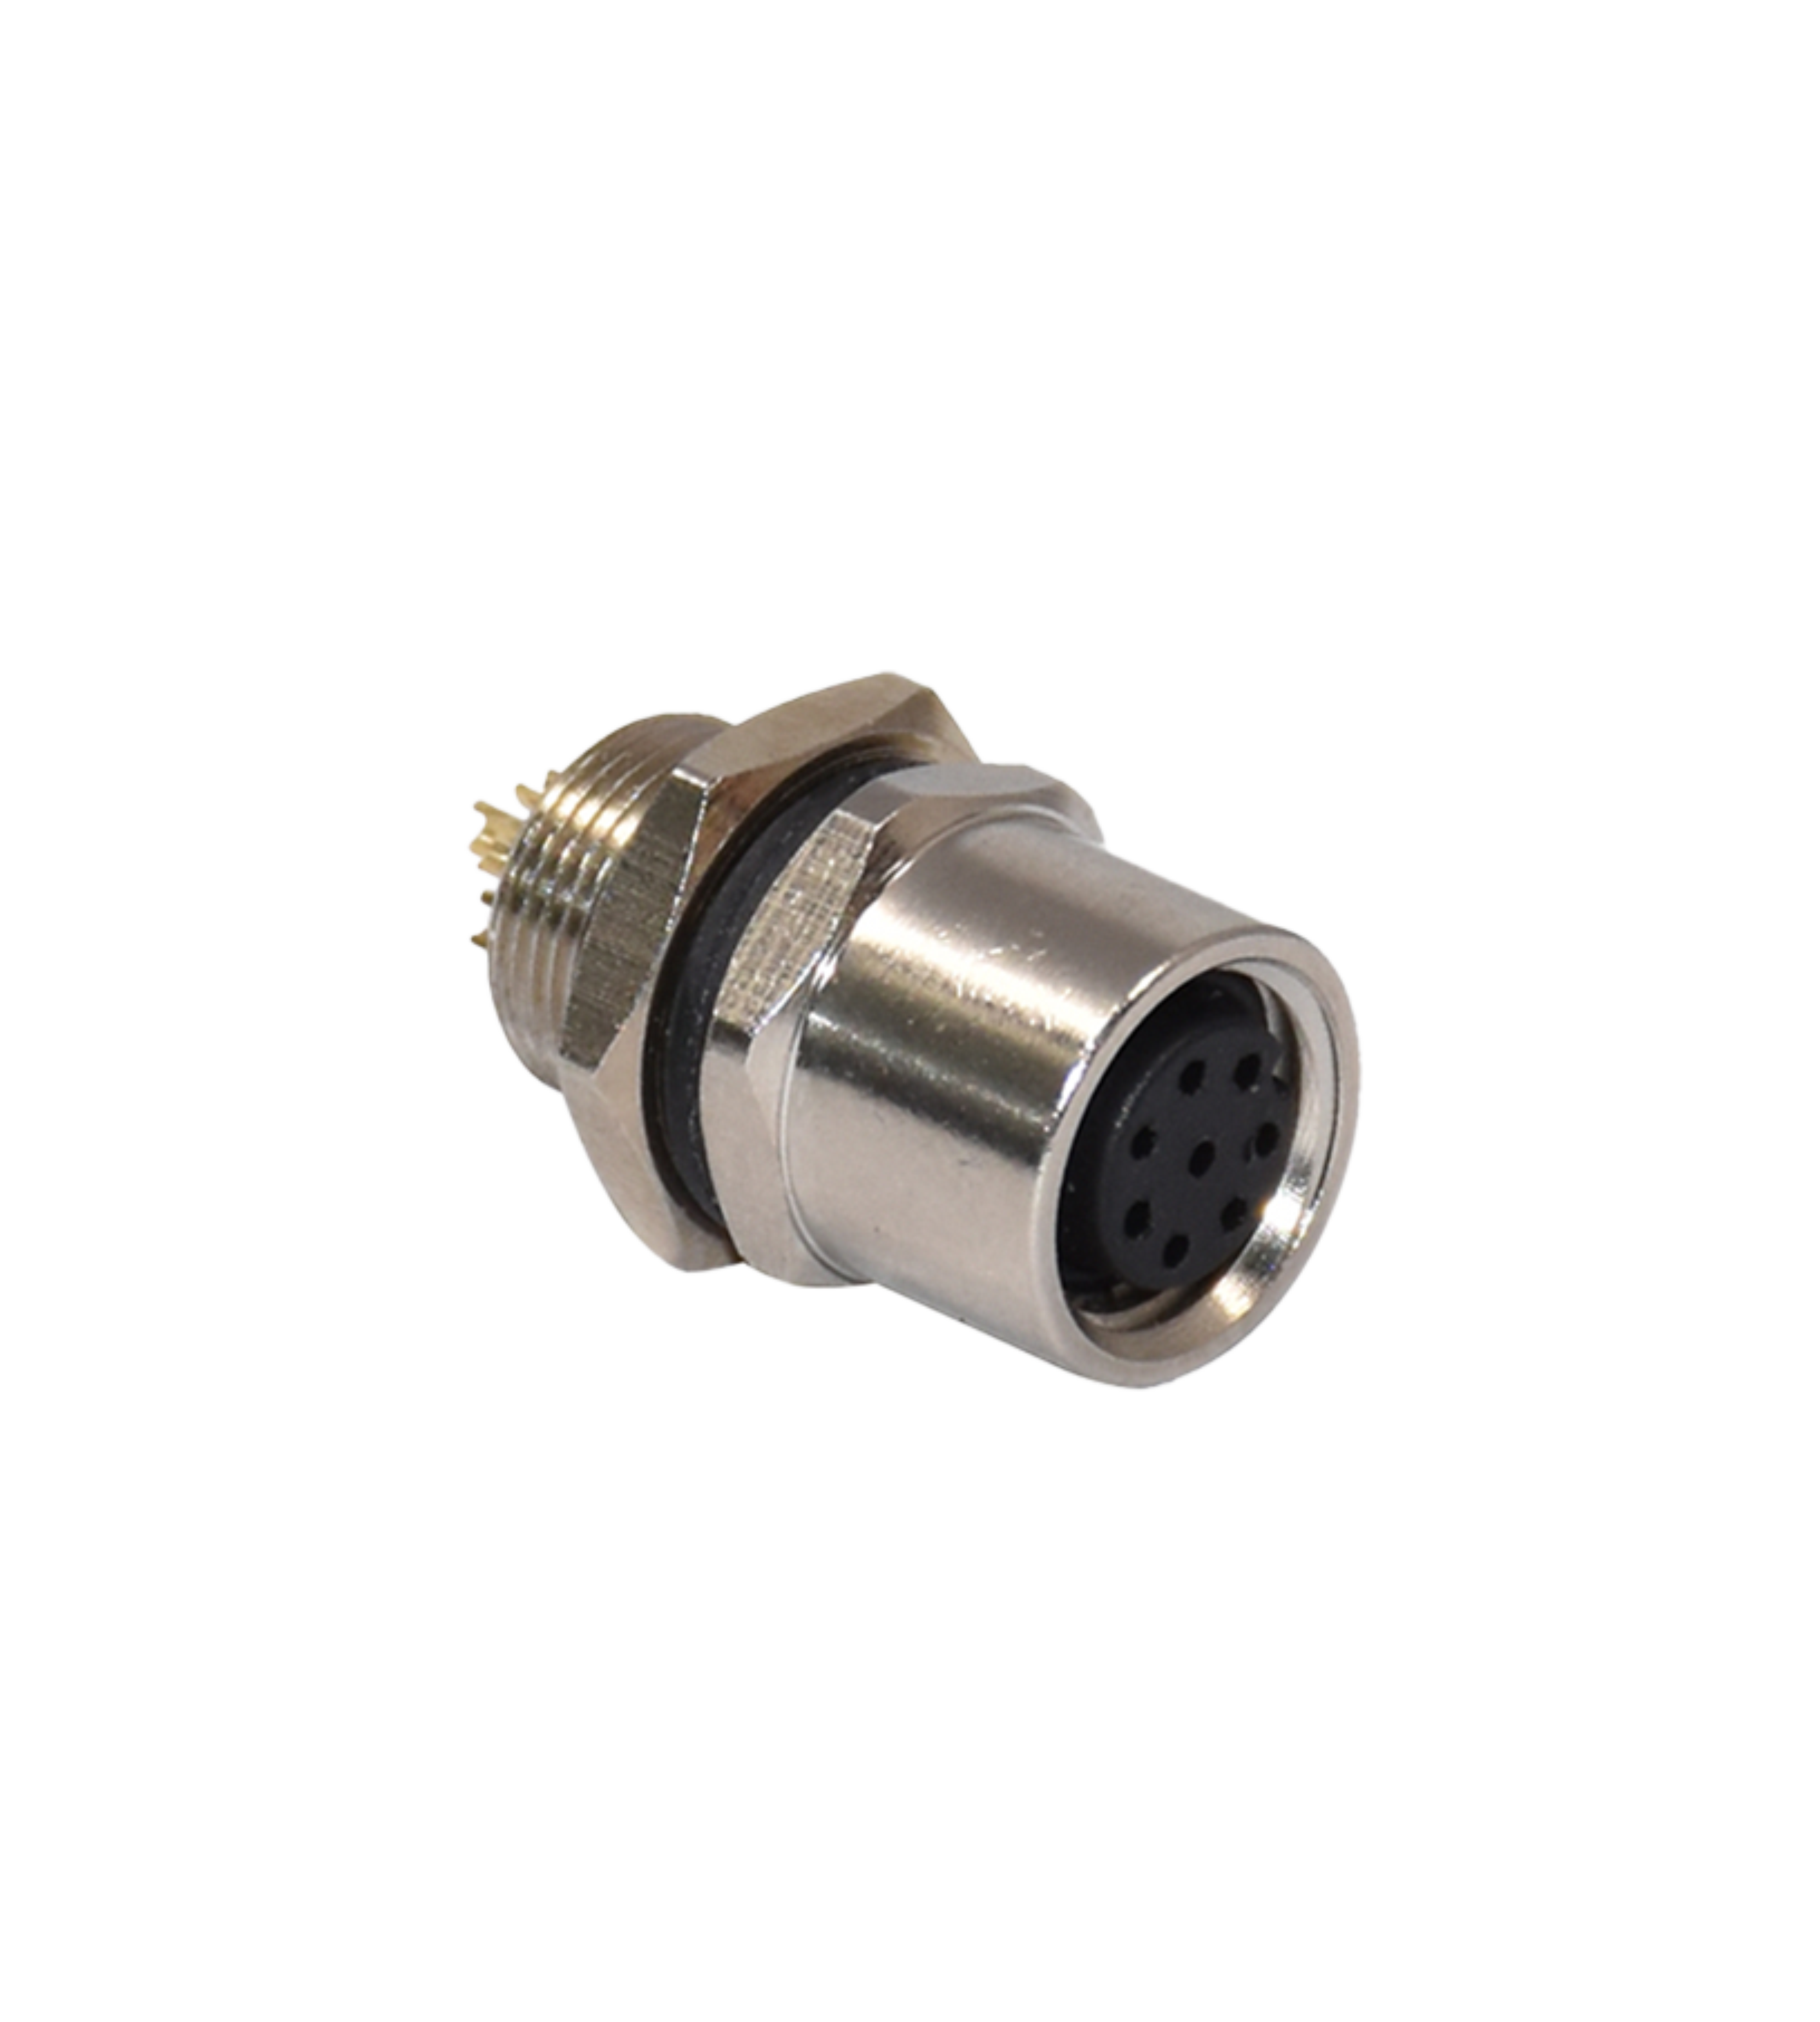 Revolutionizing Industrial Efficiency with Rigoal's Advanced M8 Connector Technology